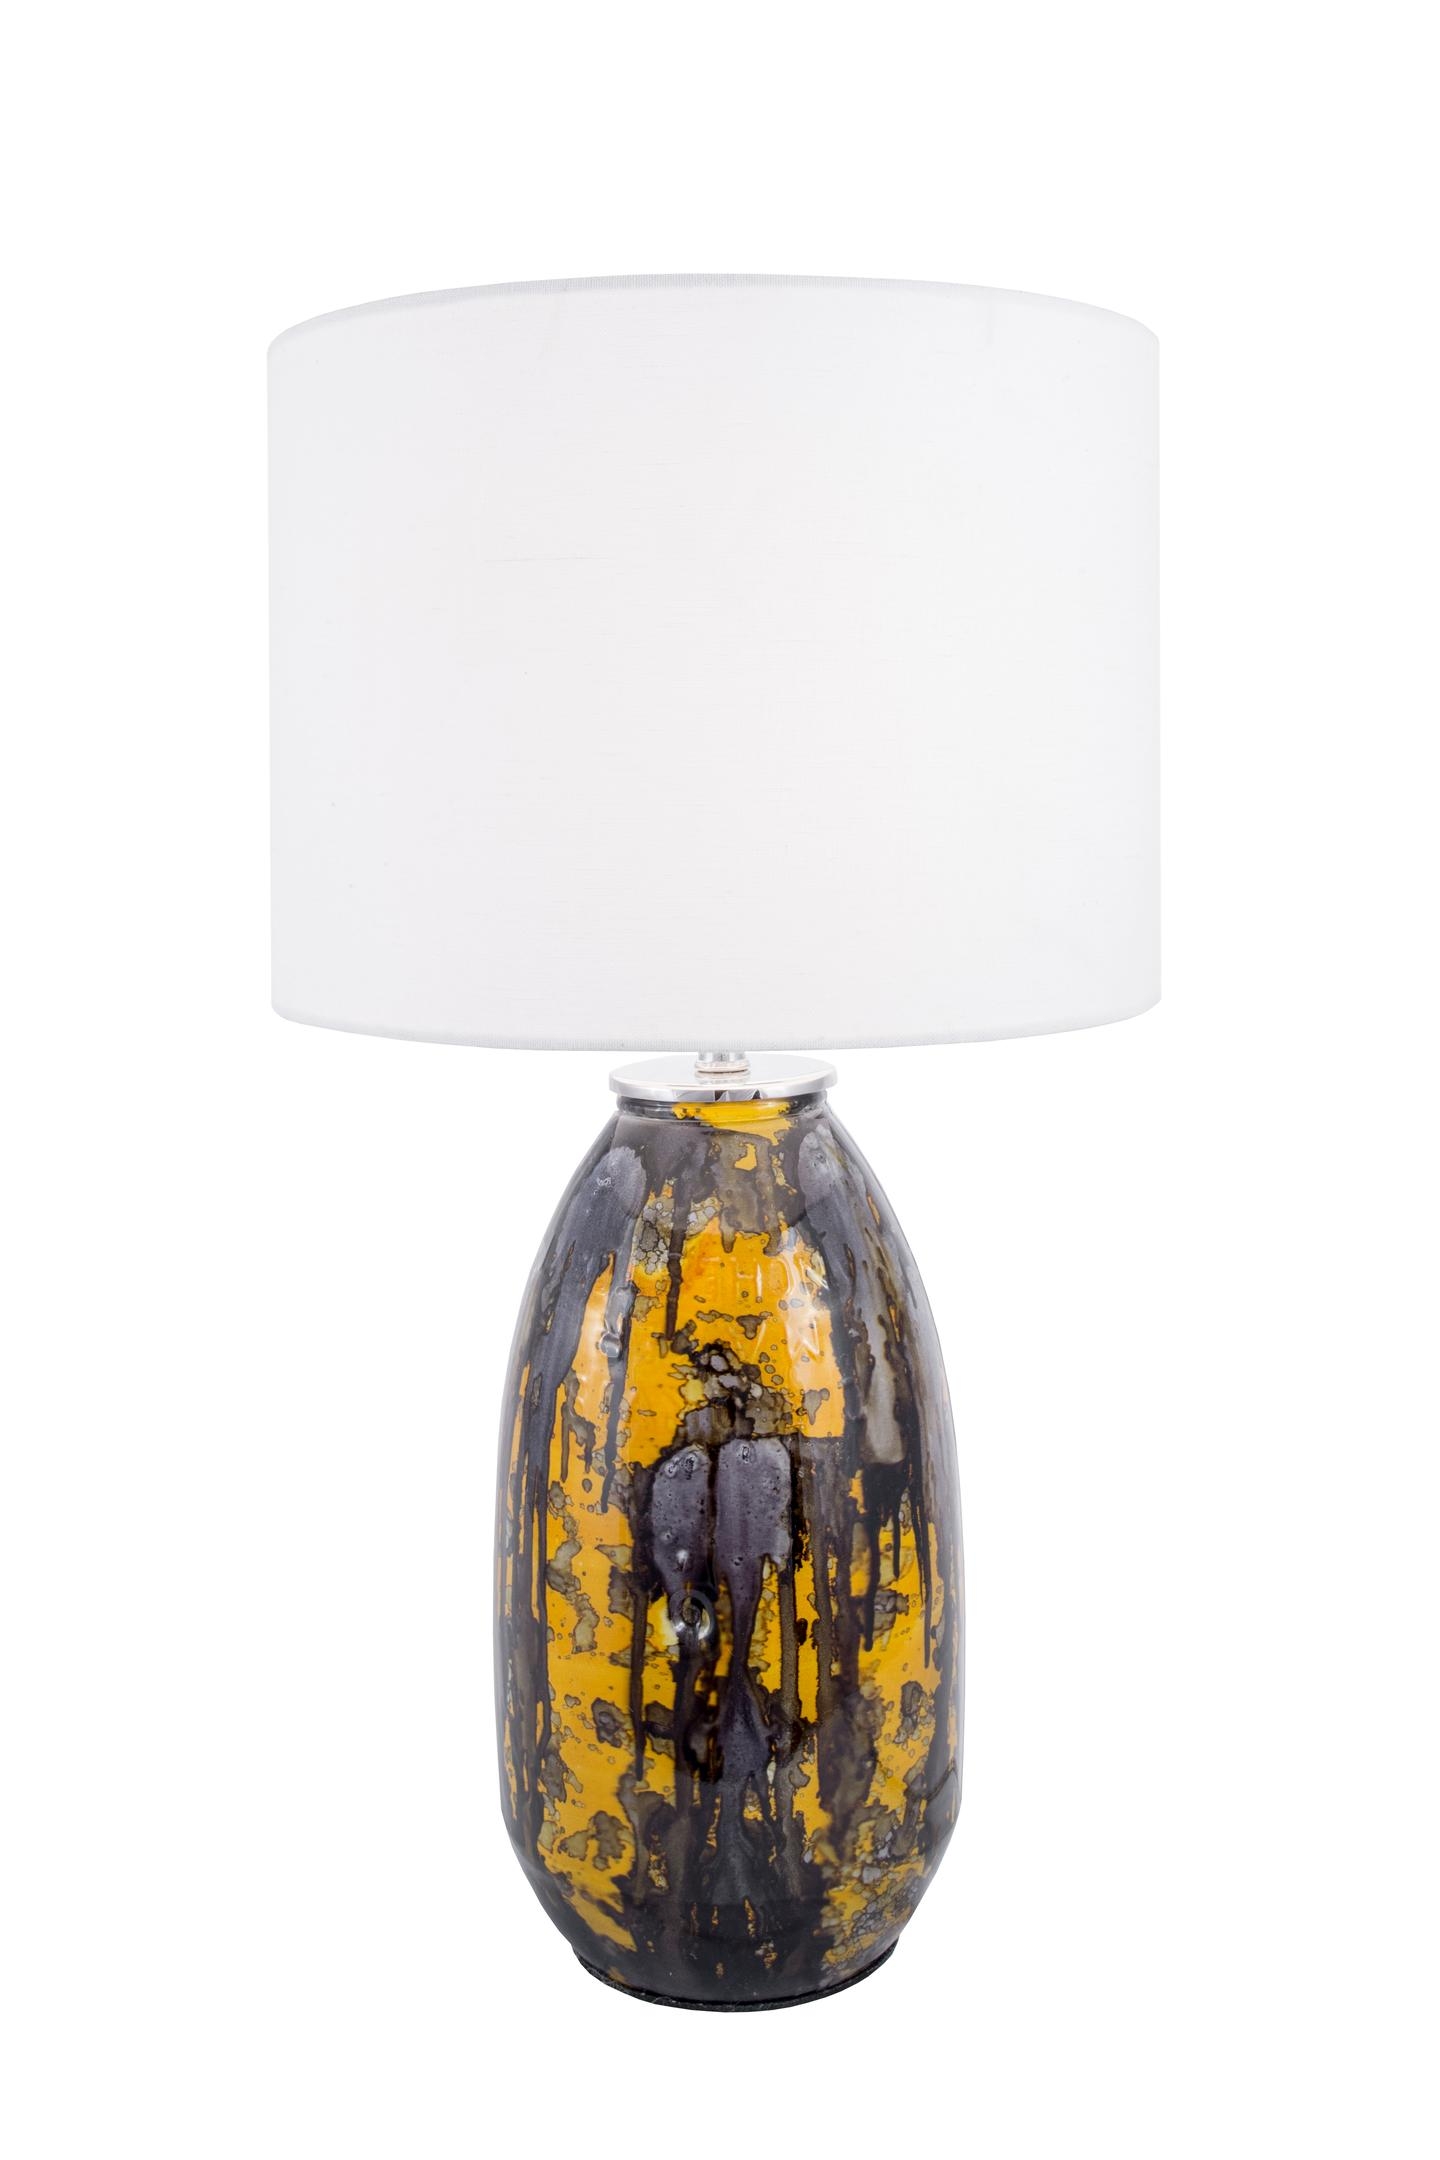  Clinton 25" Glass Table Lamp - Image 1